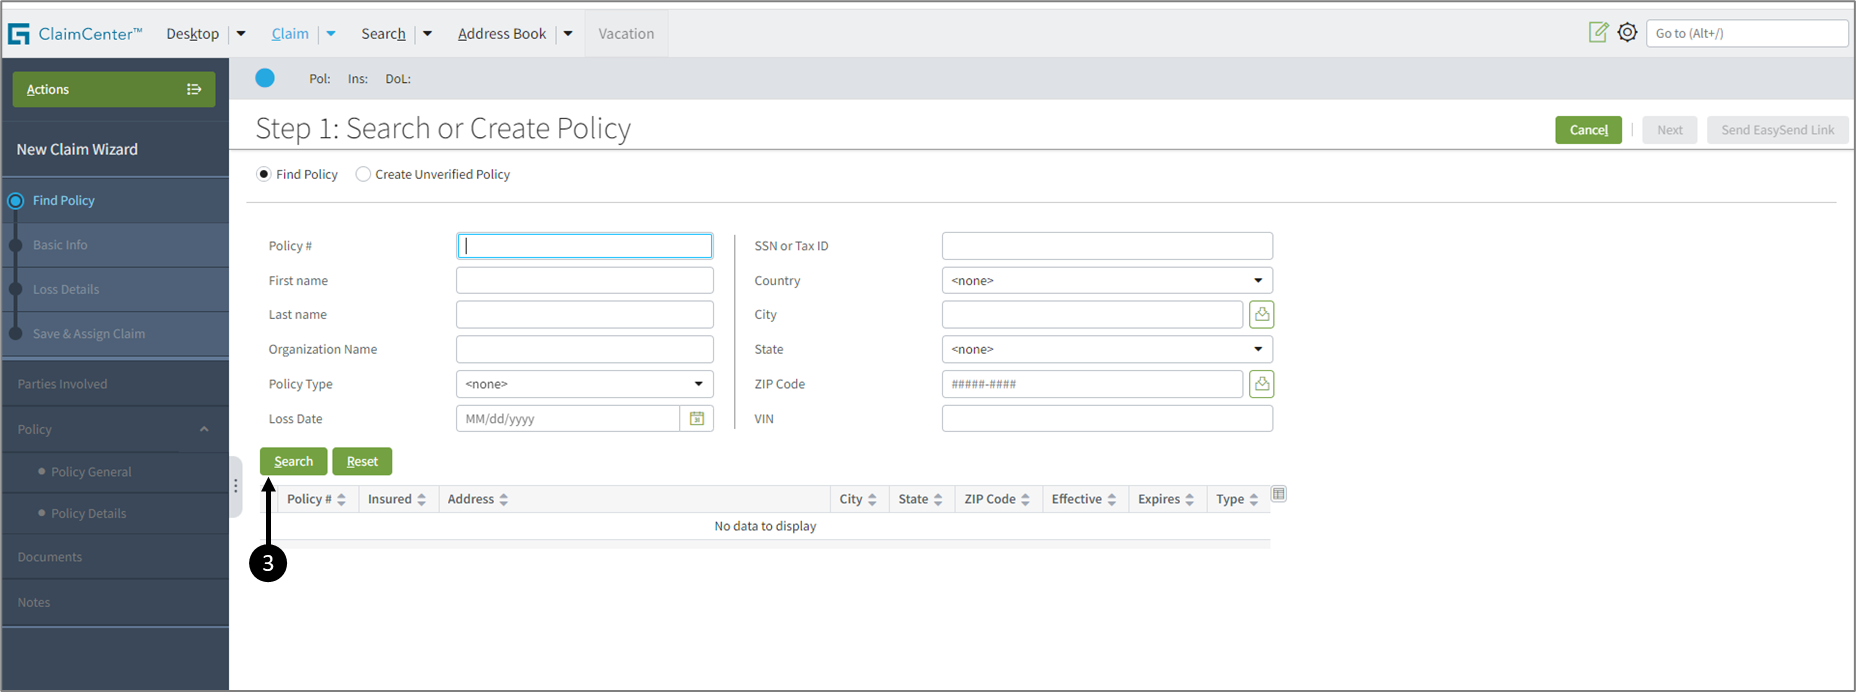 Search for a policy, enter details first to narrow to search, or click the Search button to display all policies.